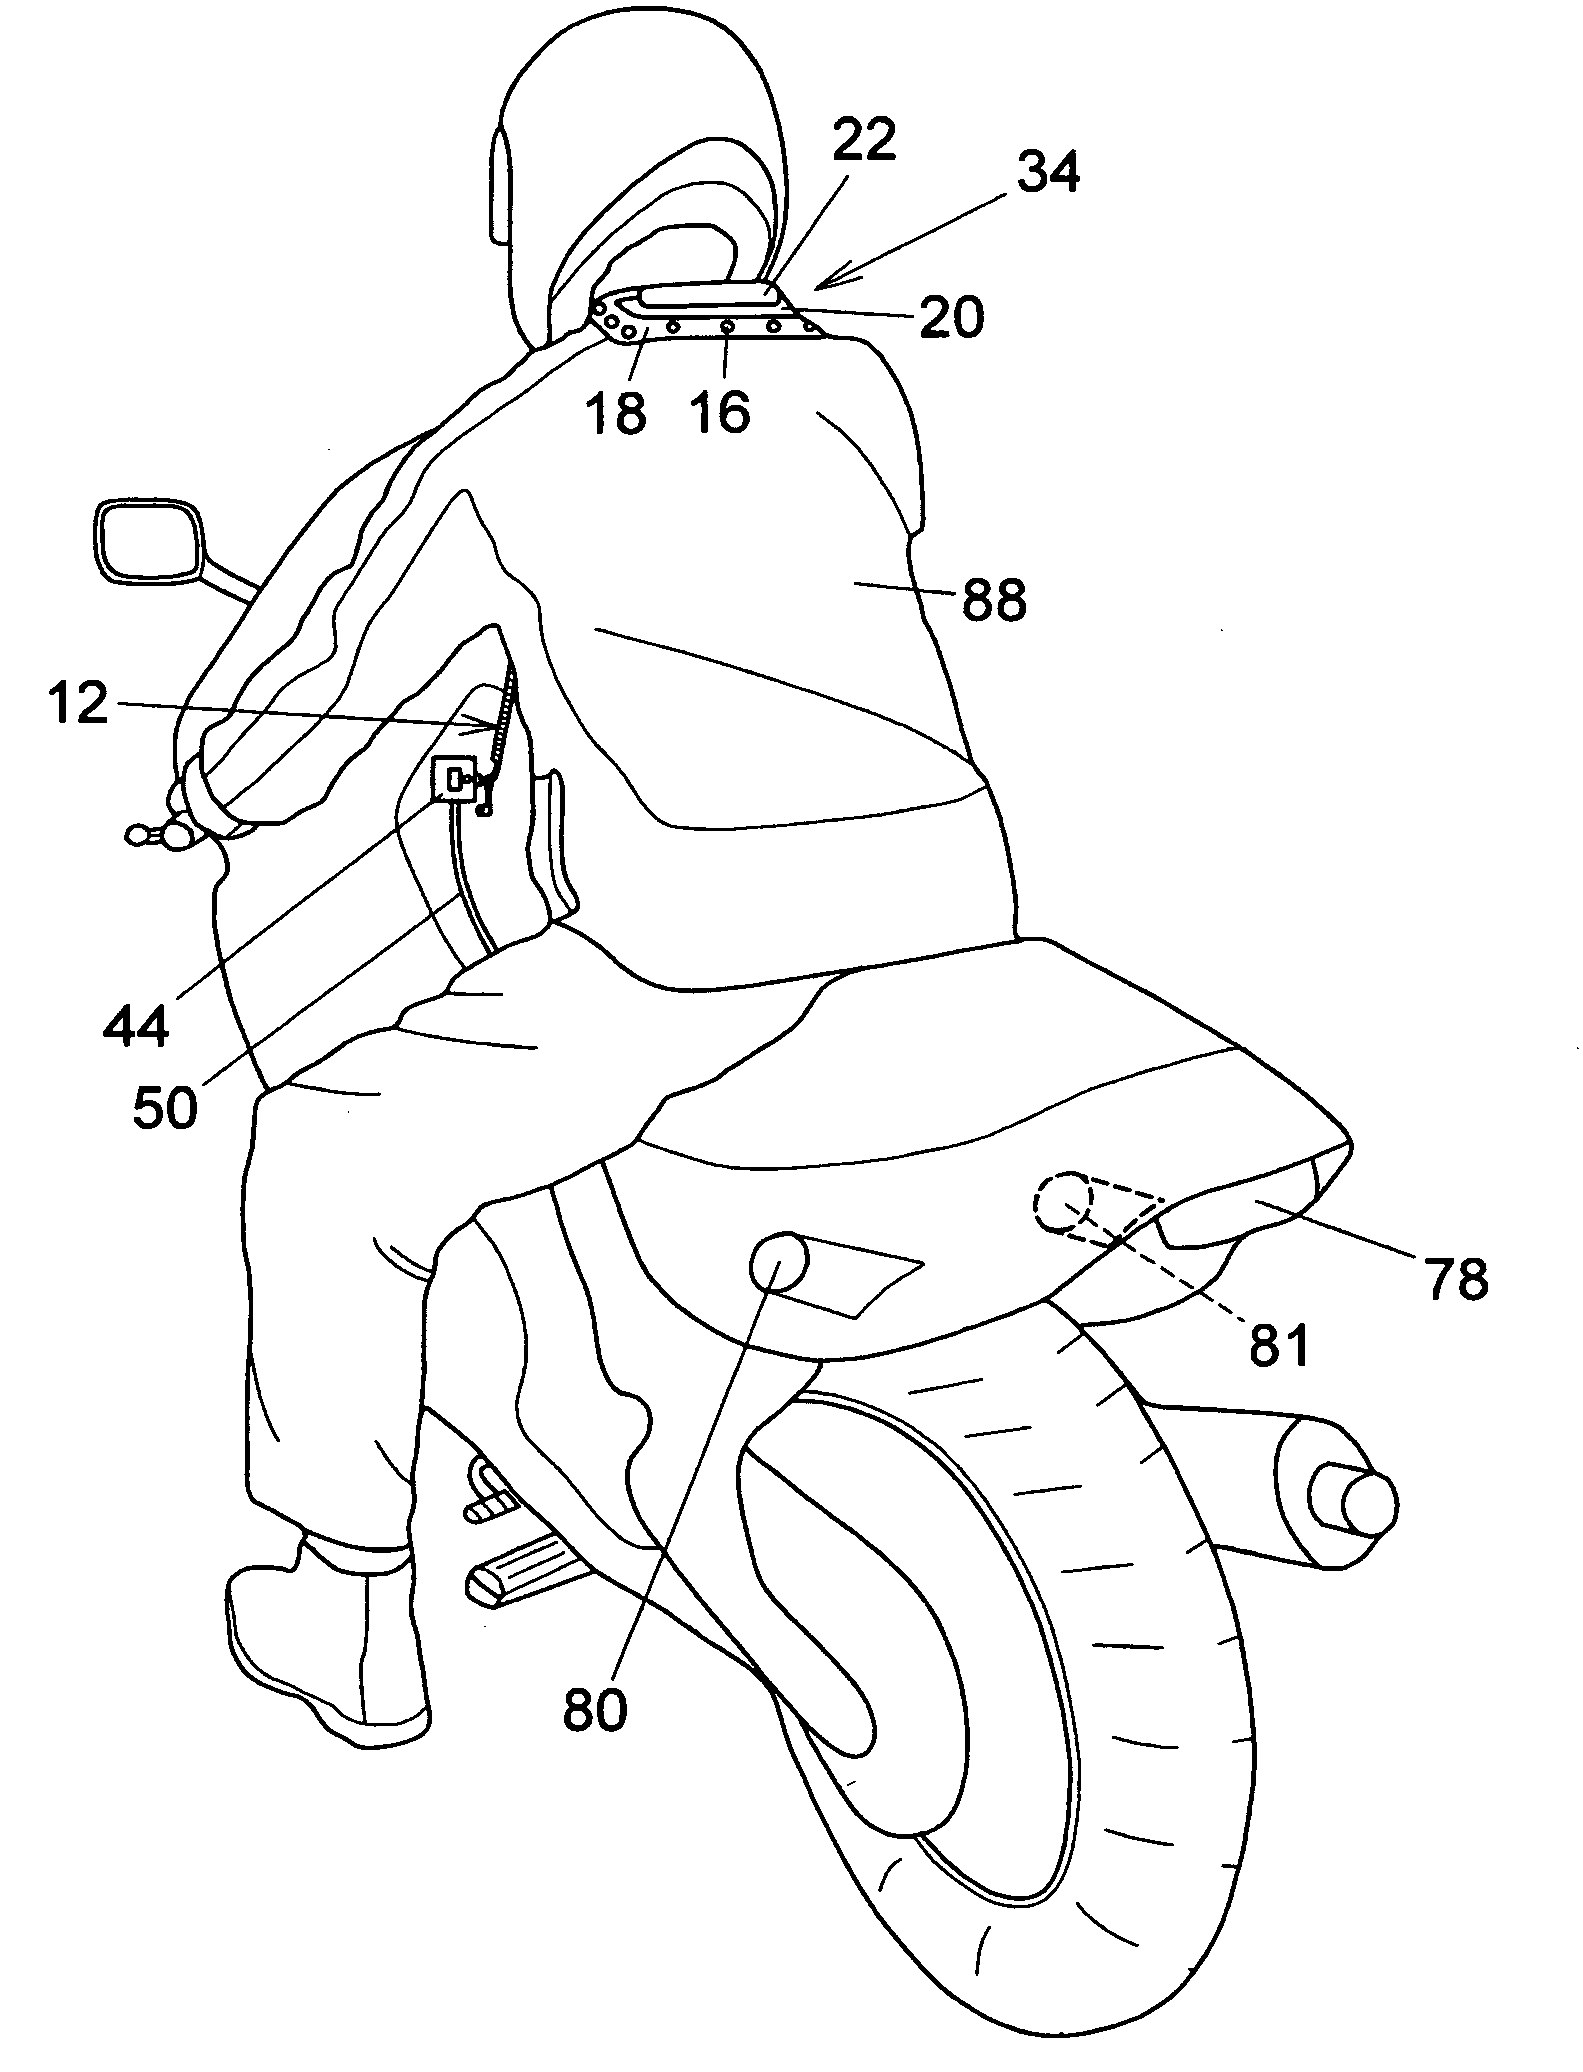 Motorcycle safety brake and running light for a jacket or vest